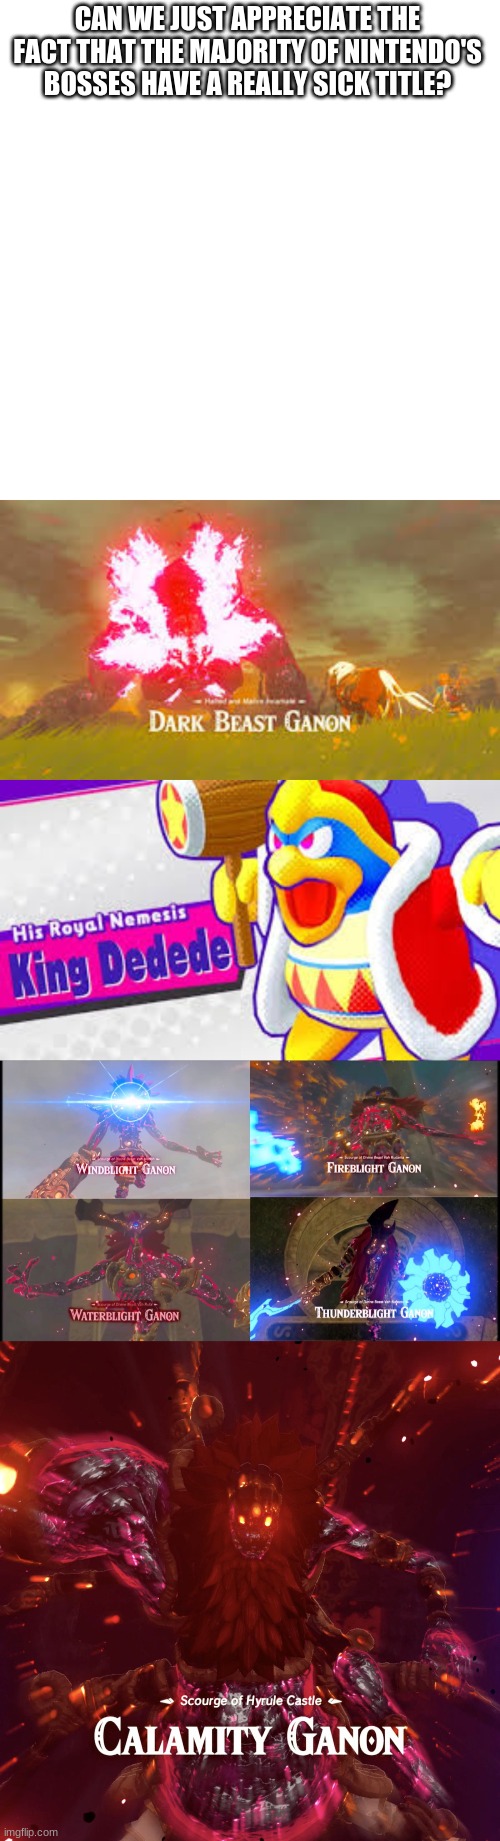 CAN WE JUST APPRECIATE THE FACT THAT THE MAJORITY OF NINTENDO'S BOSSES HAVE A REALLY SICK TITLE? | image tagged in memes,blank transparent square | made w/ Imgflip meme maker